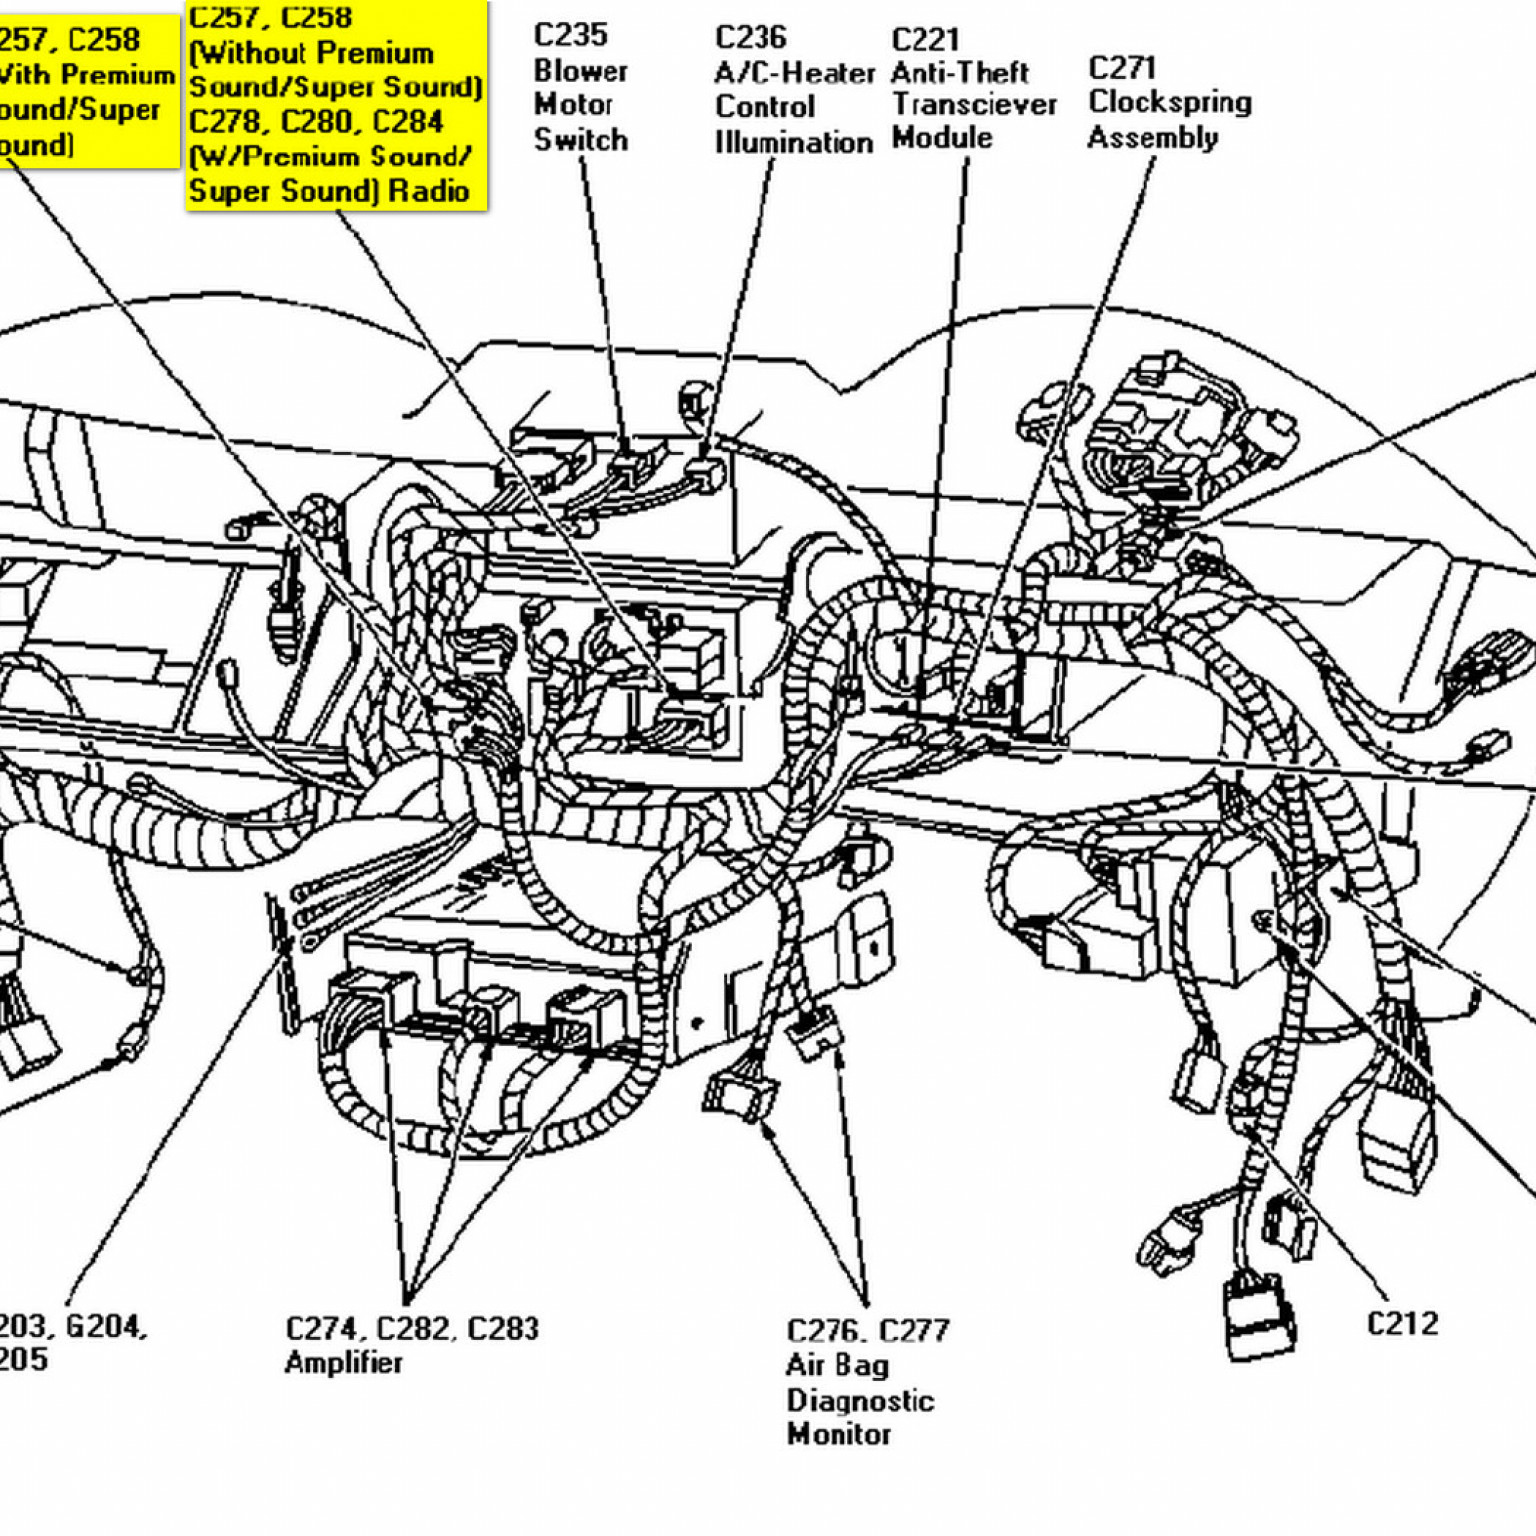 Diagram] 1979 Ford F100 460 Engine Diagram Full Version Hd Wiring and